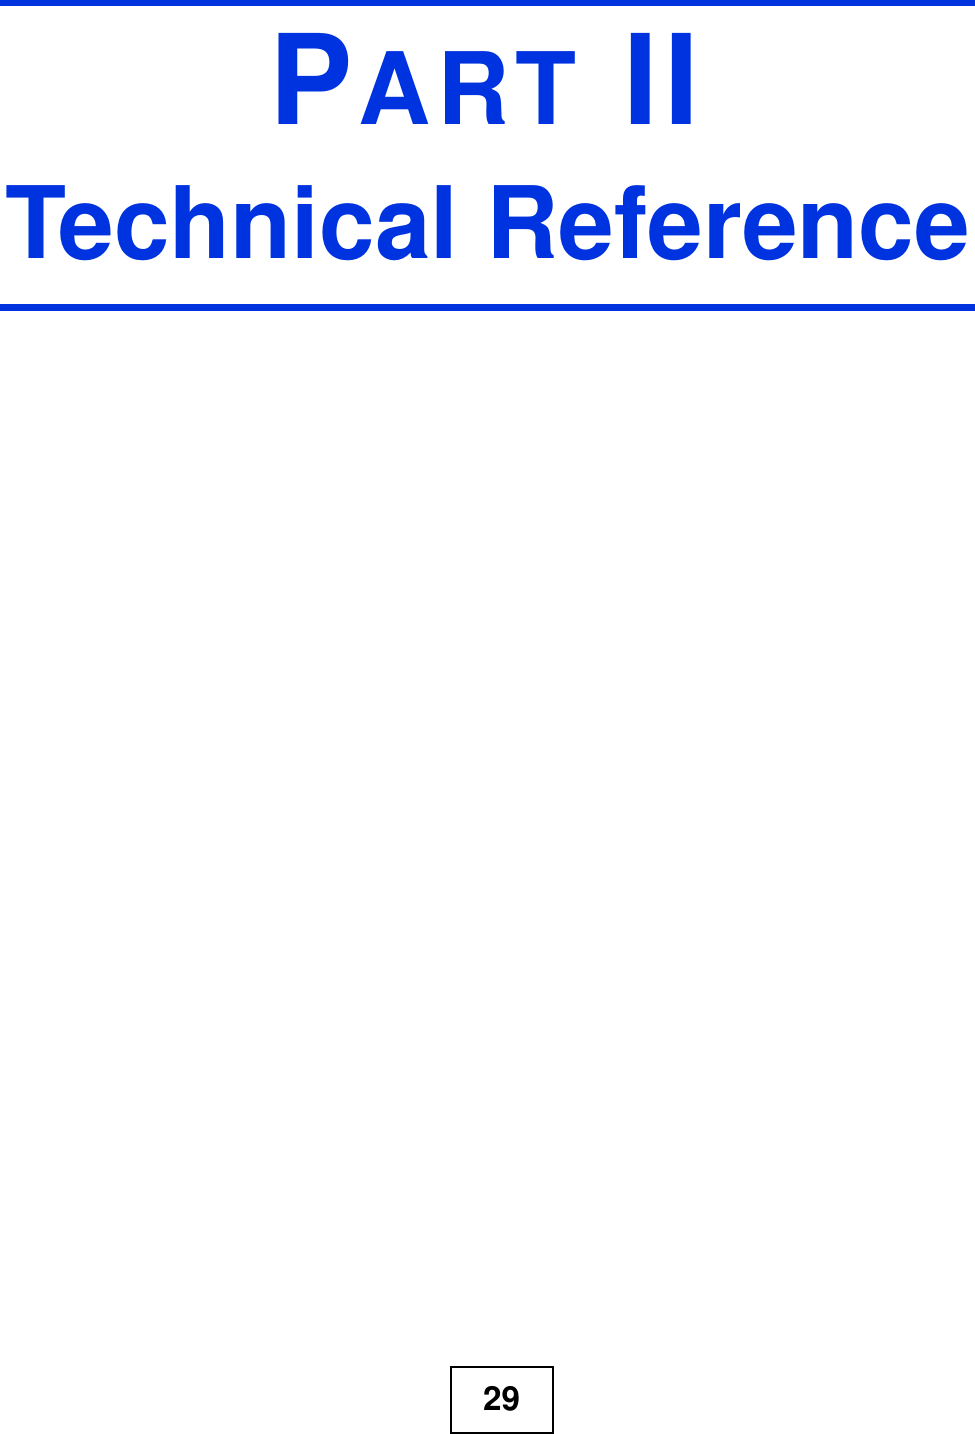 29PART IITechnical Reference